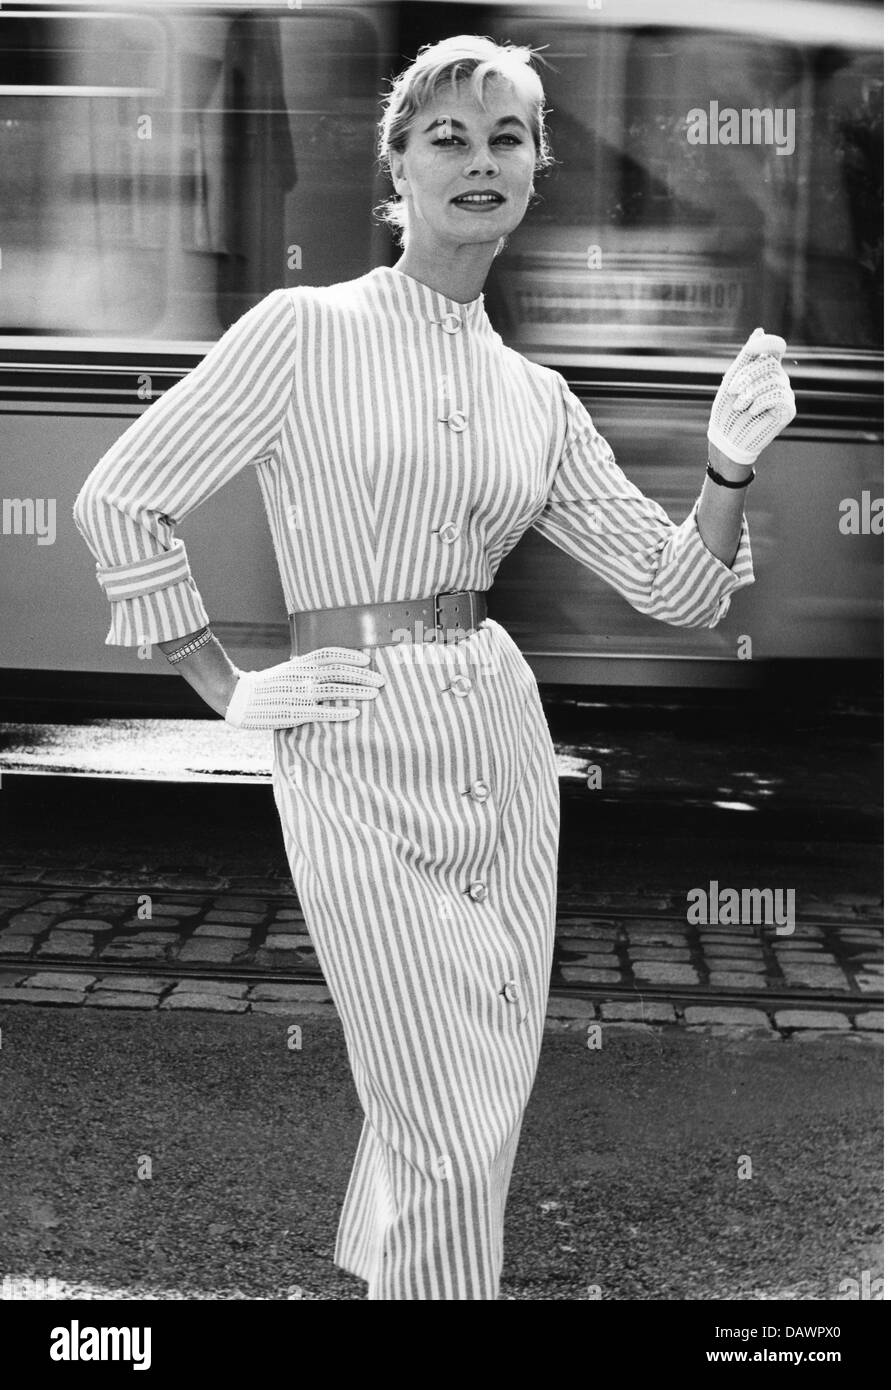 fashion, ladies' fashion, fashion model in woman's suit, 1958, Additional-Rights-Clearences-Not Available Stock Photo